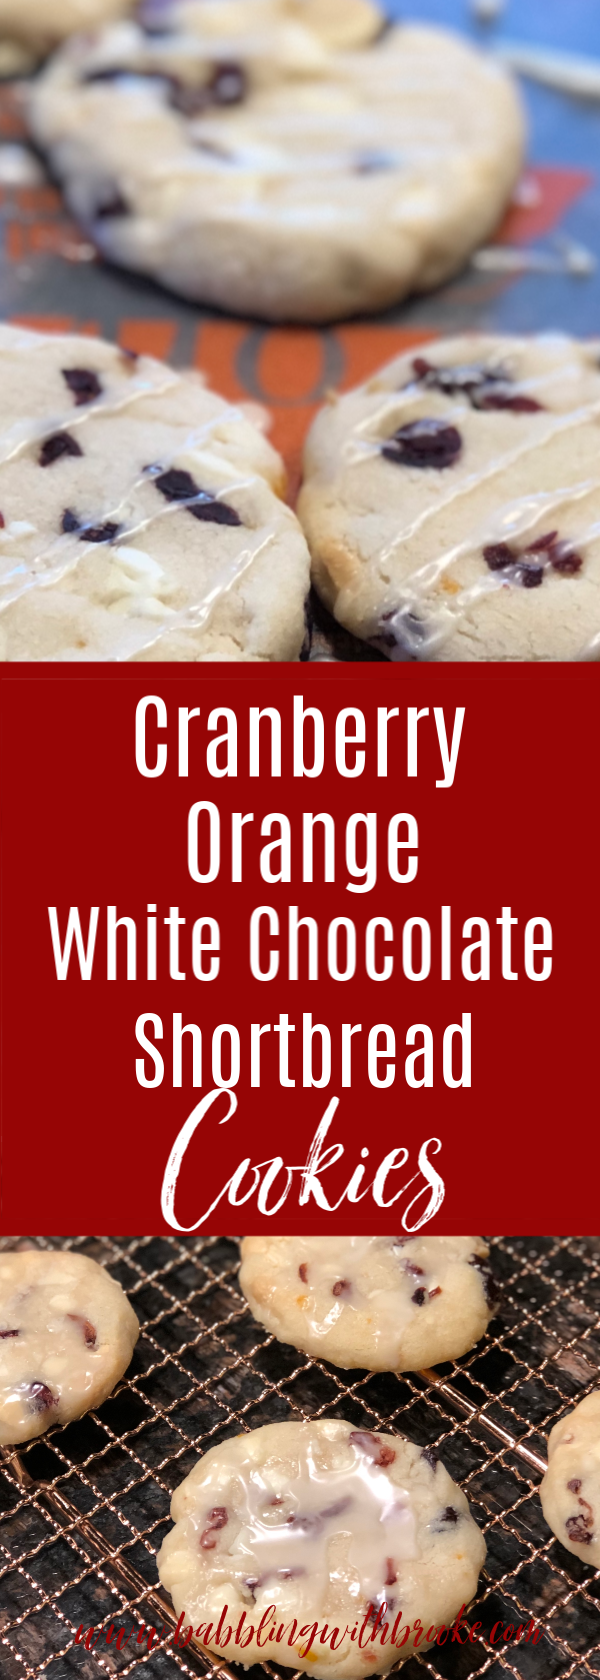 This shortbread cookie recipe is absolutely amazing! It is so easy and delicious to boot! The perfect combination of cranberry and orange with the sweetness of white chocolate chips makes for the best cookie recipe around! #shortbreadcookies #cookies #cranberryorangecookies #whitechocolatecranberry #whitechocolatechipcookies #easycookierecipe